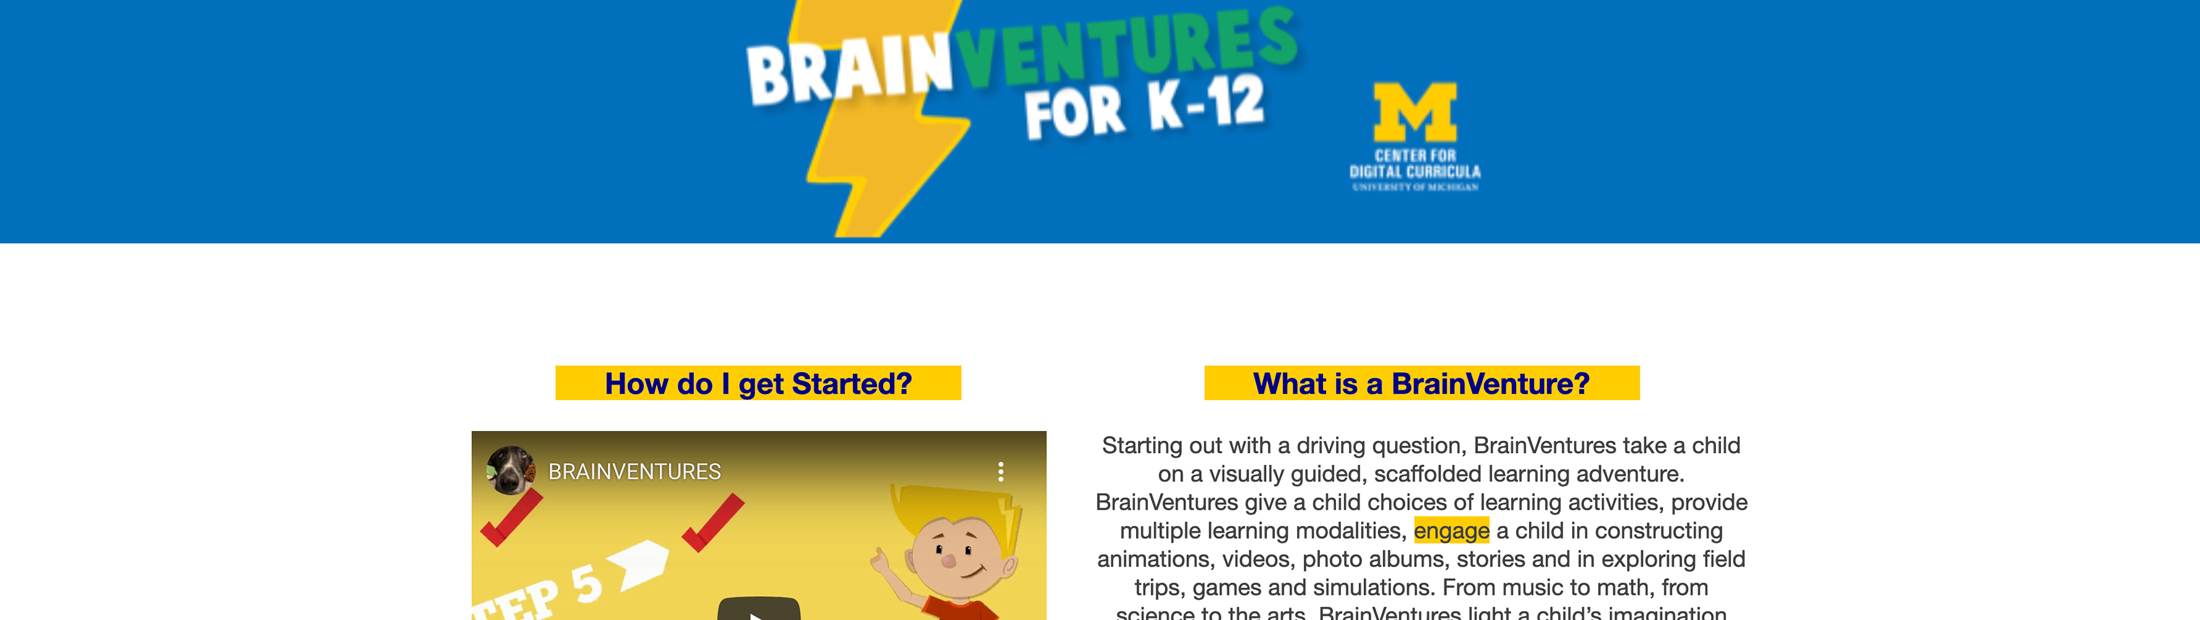 K-12 online learning platform from U-Michigan sees dramatic rise in use